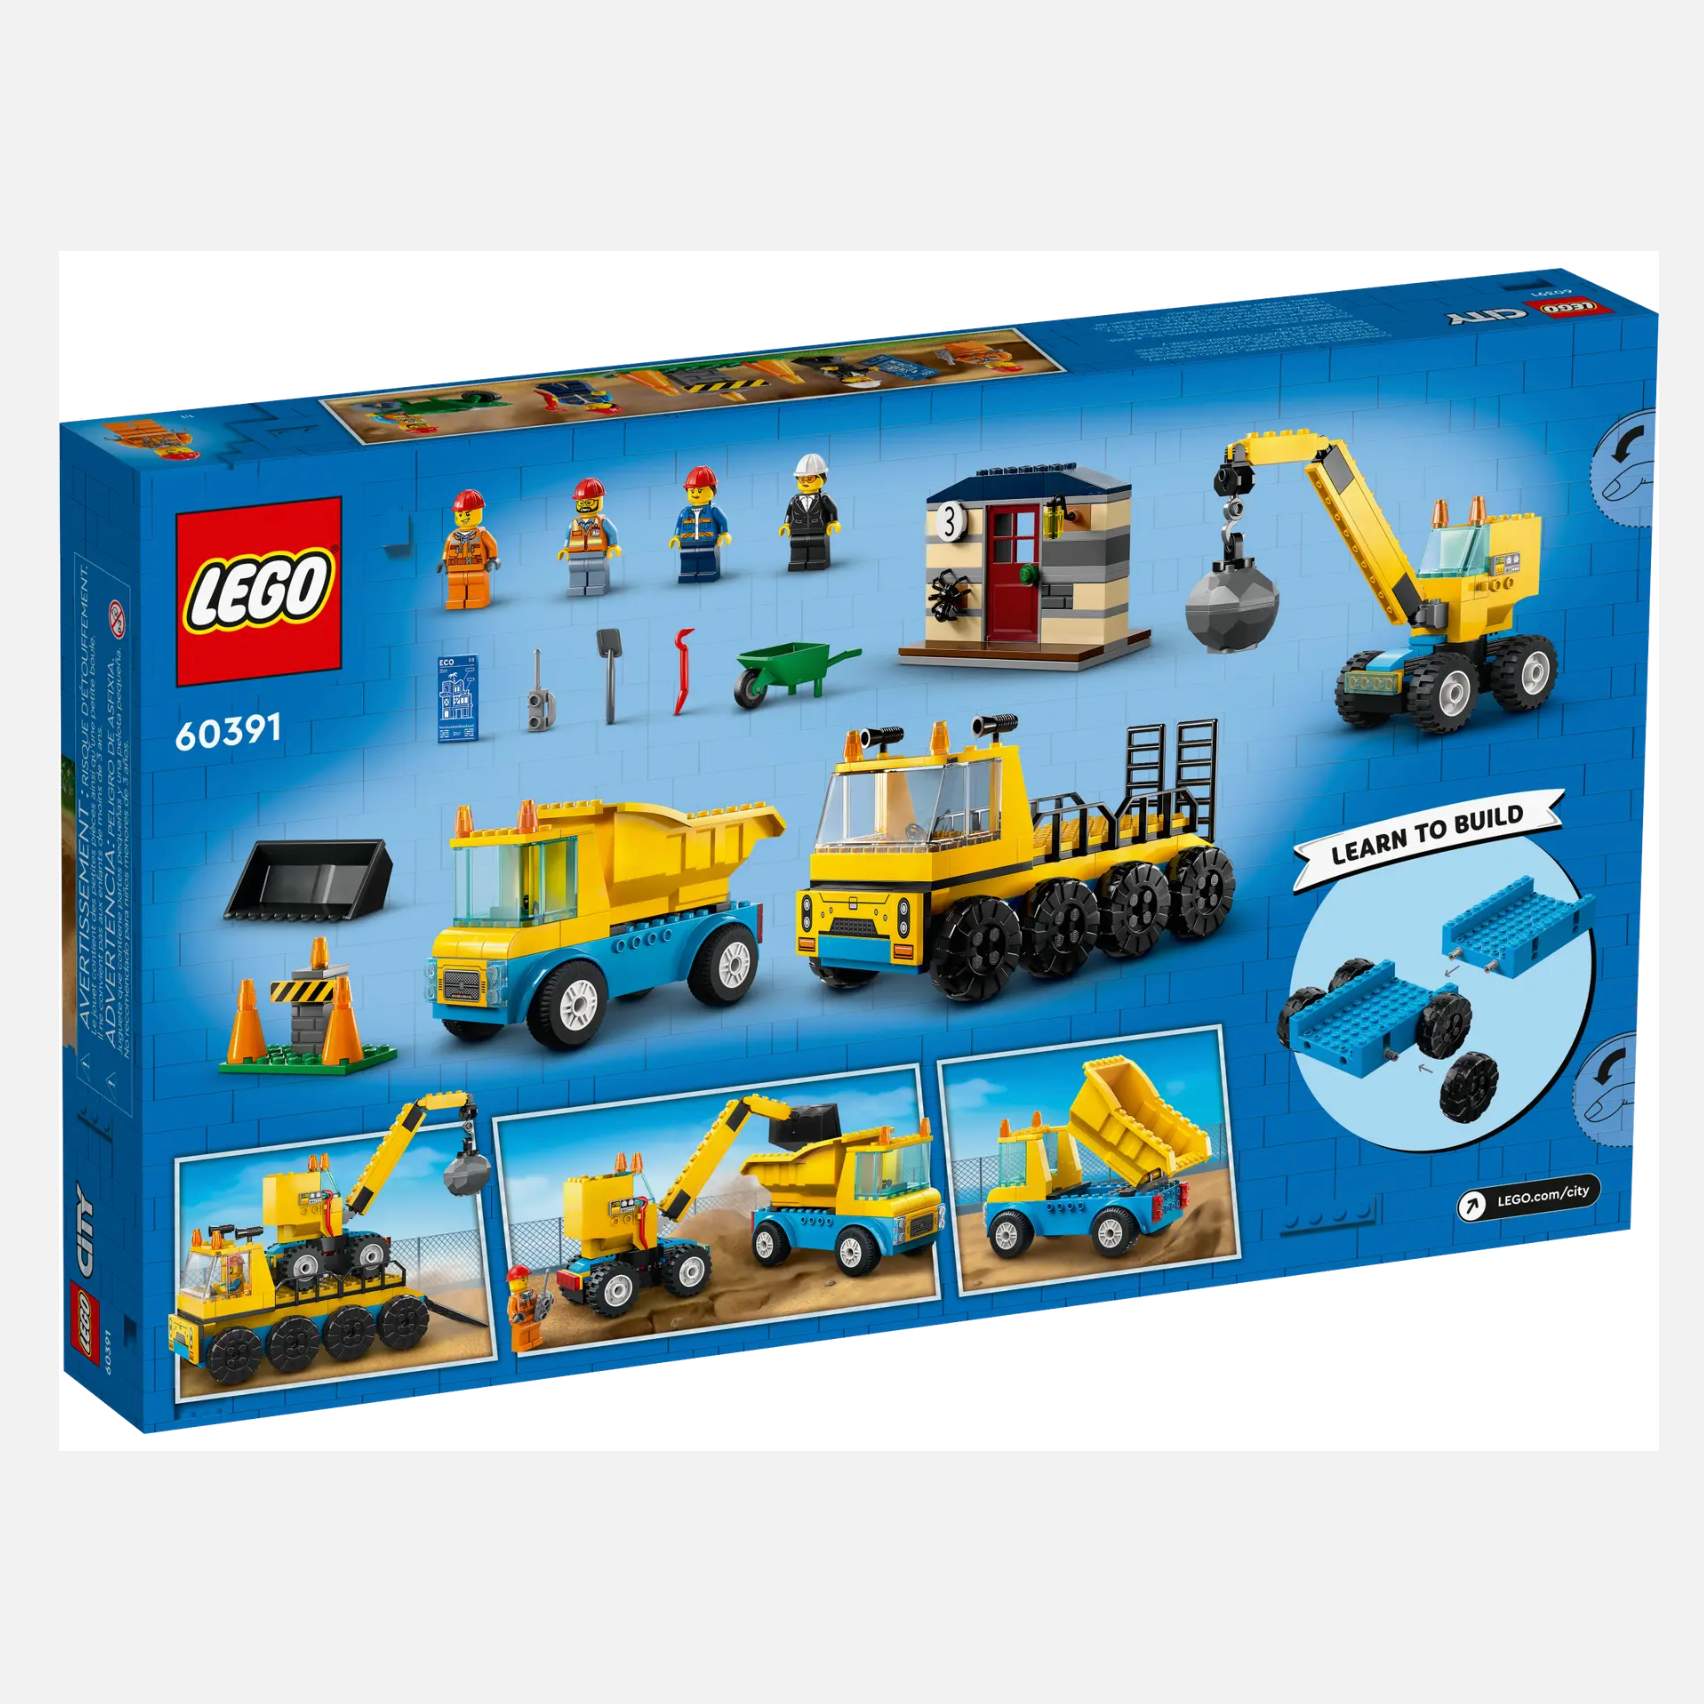 60391 Construction Trucks and Wrecking Ball Crew